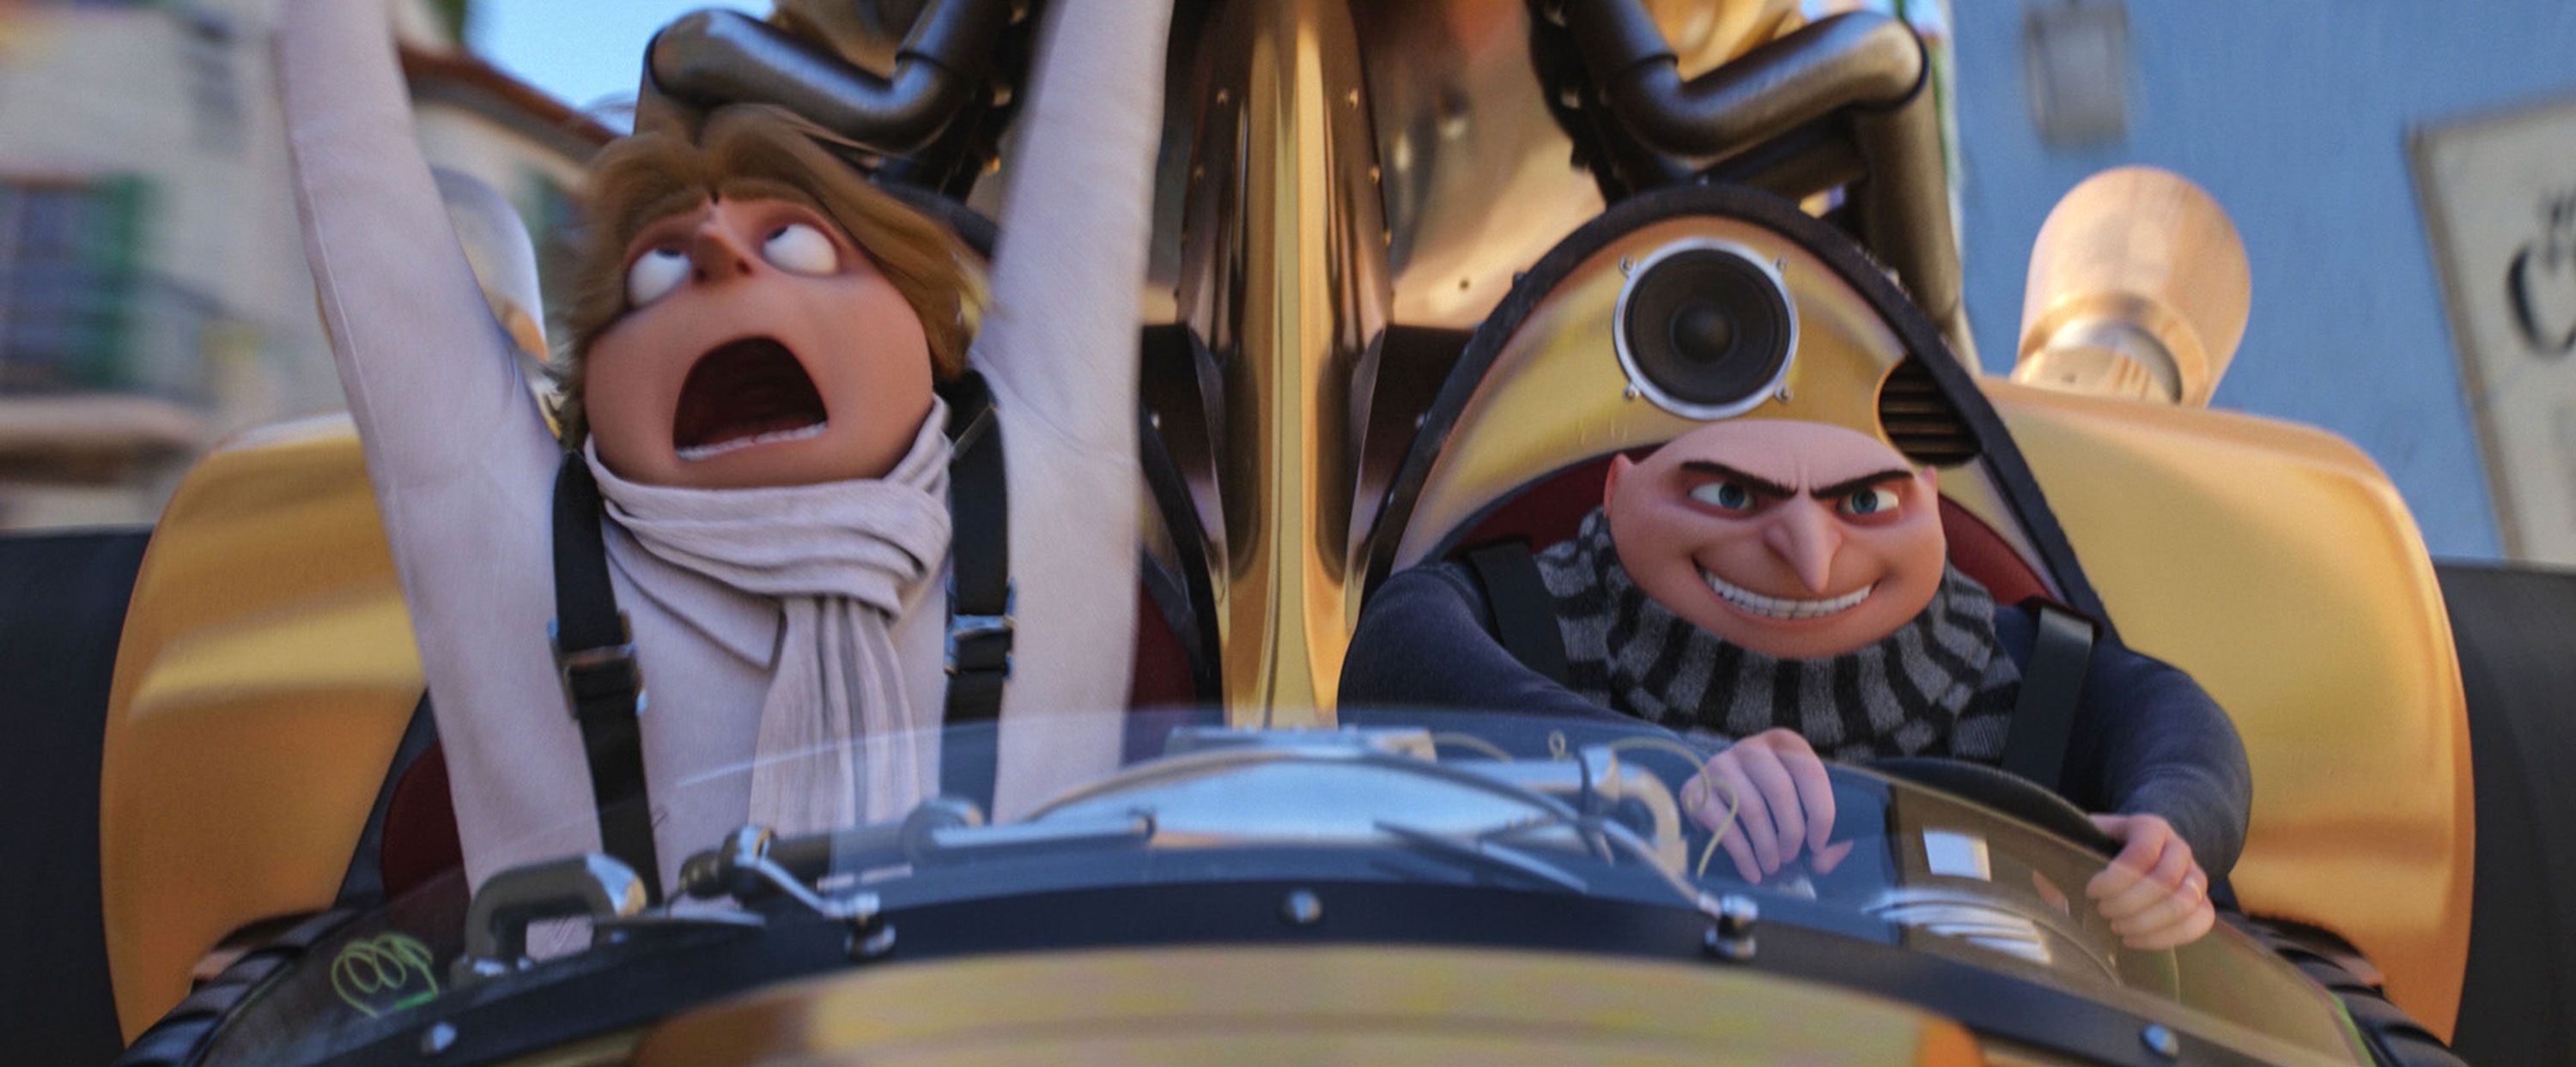 Illuminating Illumination  Despicable Me 2010 Review  The Anime Madhouse